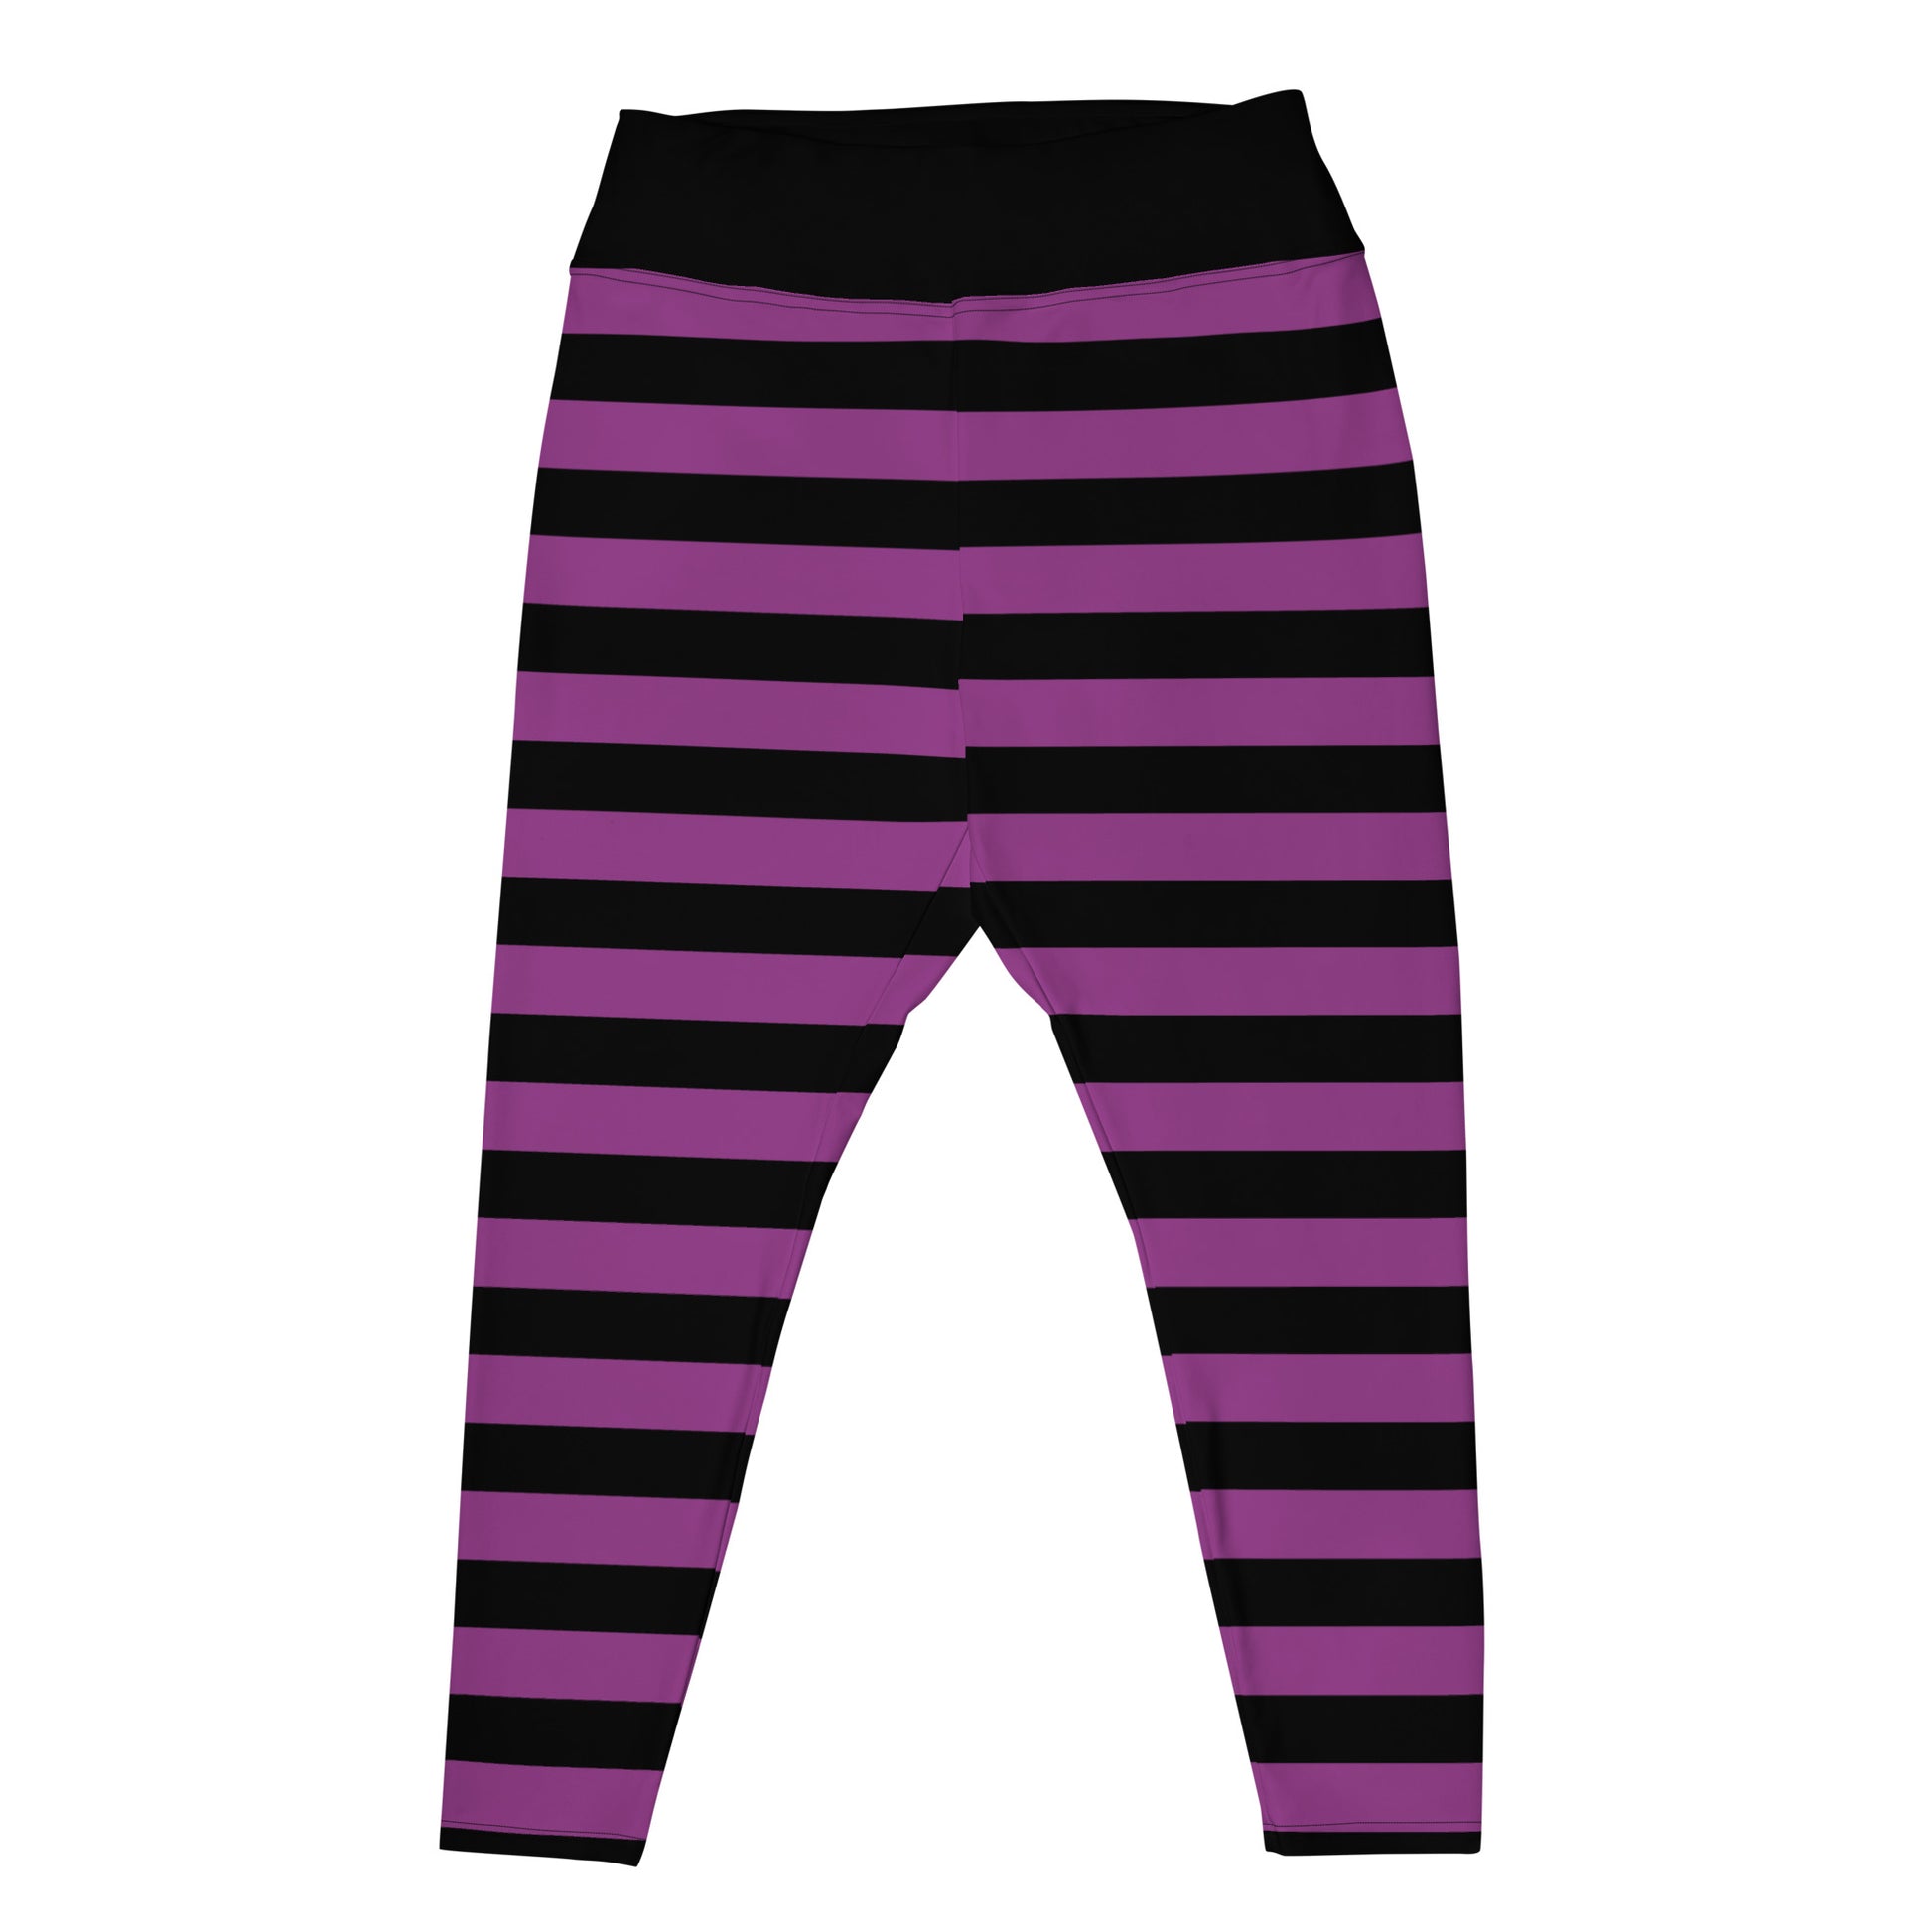 Black and Purple Striped Plus Size Leggings Women, Halloween Witch Tights Goth Printed Yoga Pants Cute Adult Workout Starcove Fashion